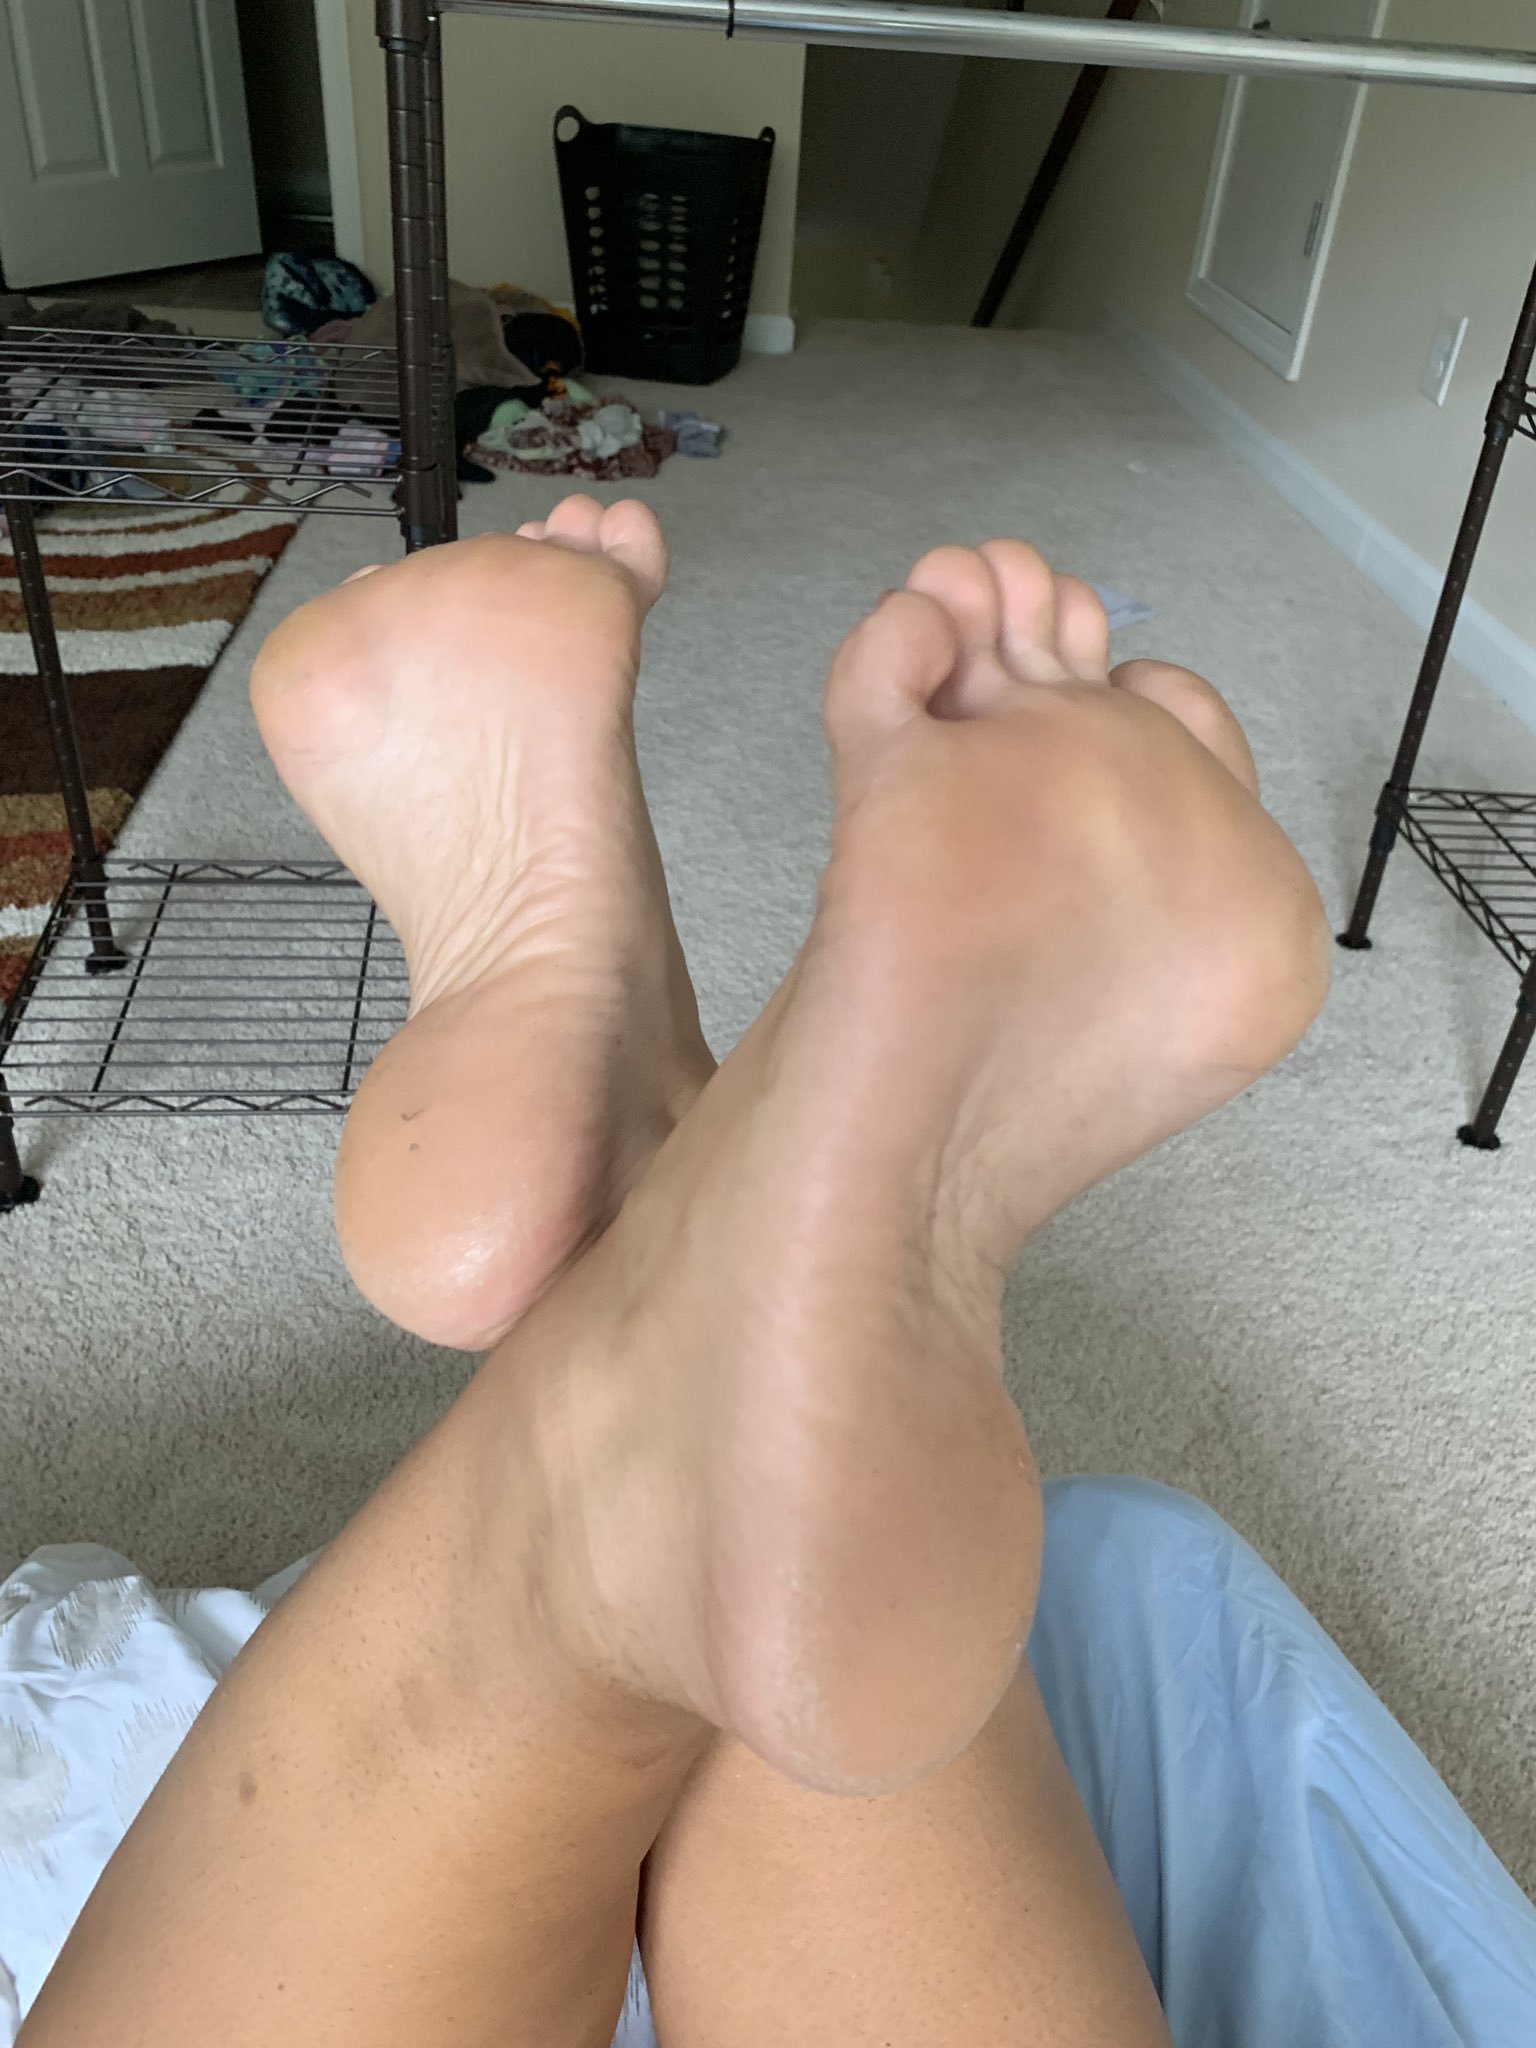 Sexy soles in the pose